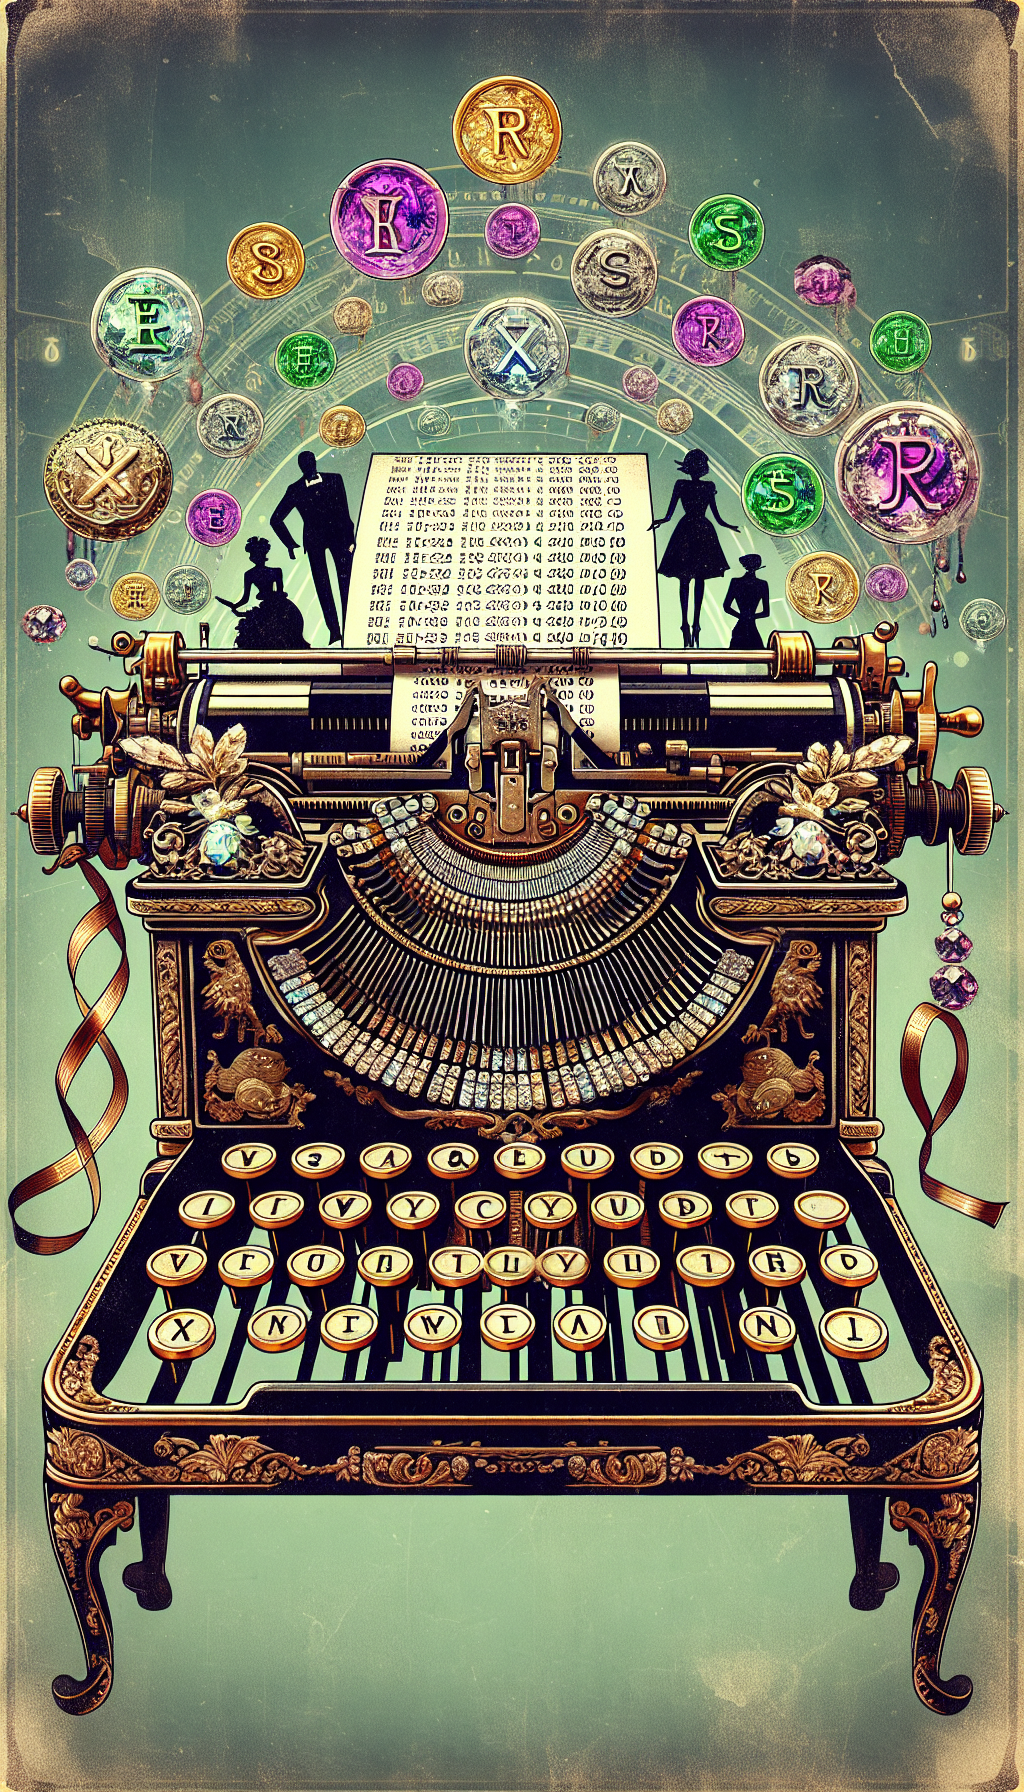 An ornate, vintage Royal typewriter sits atop an antique auction pedestal, its keys crafted from rare gemstones. Ghostly currency symbols float above, merging into gleaming memories. In the background, shadow figures bid with nostalgic enthusiasm. The typewriter ribbon unfurls into a ticker tape, listing dates and escalating values in stylized, retro typography.